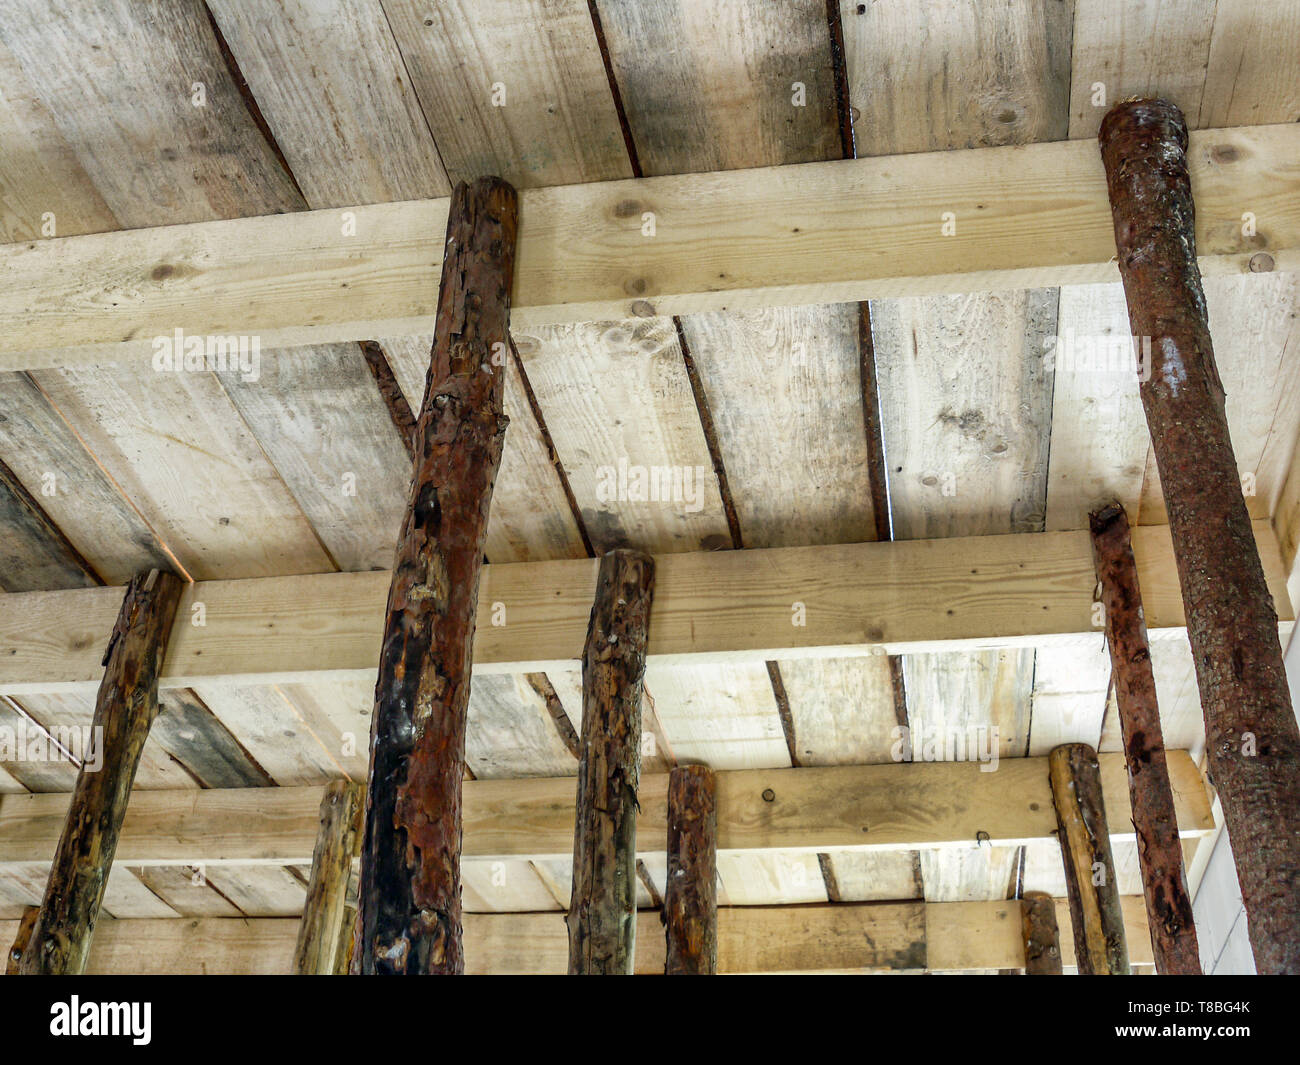 Wooden shuttering supported by props set up for casting concrete slab Stock Photo